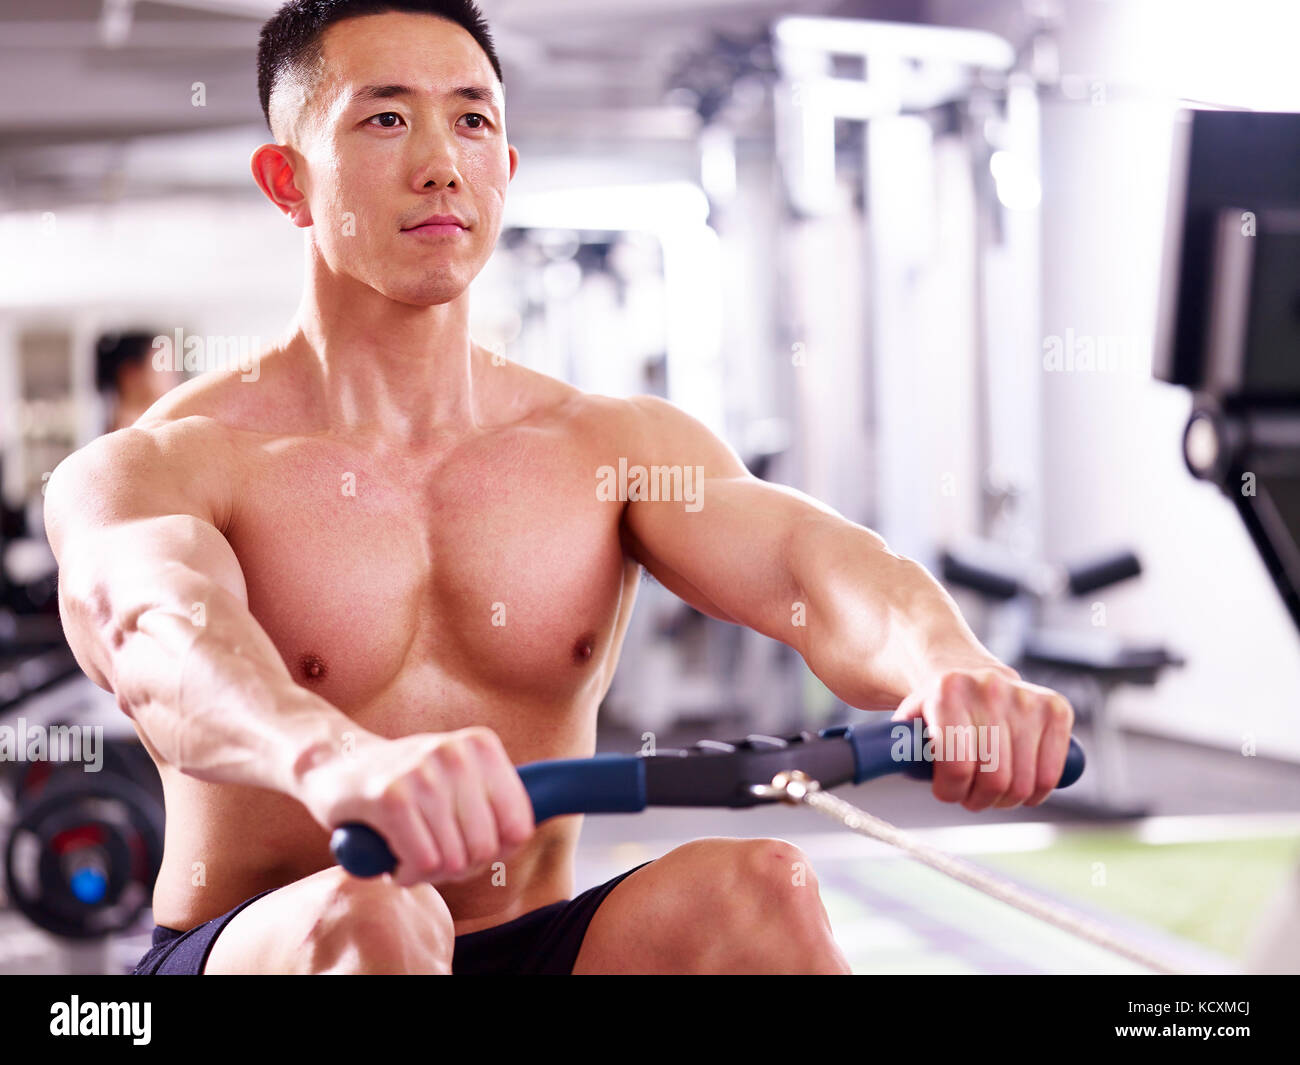 young asian muscle man working out in gym using rowing machine. Stock Photo